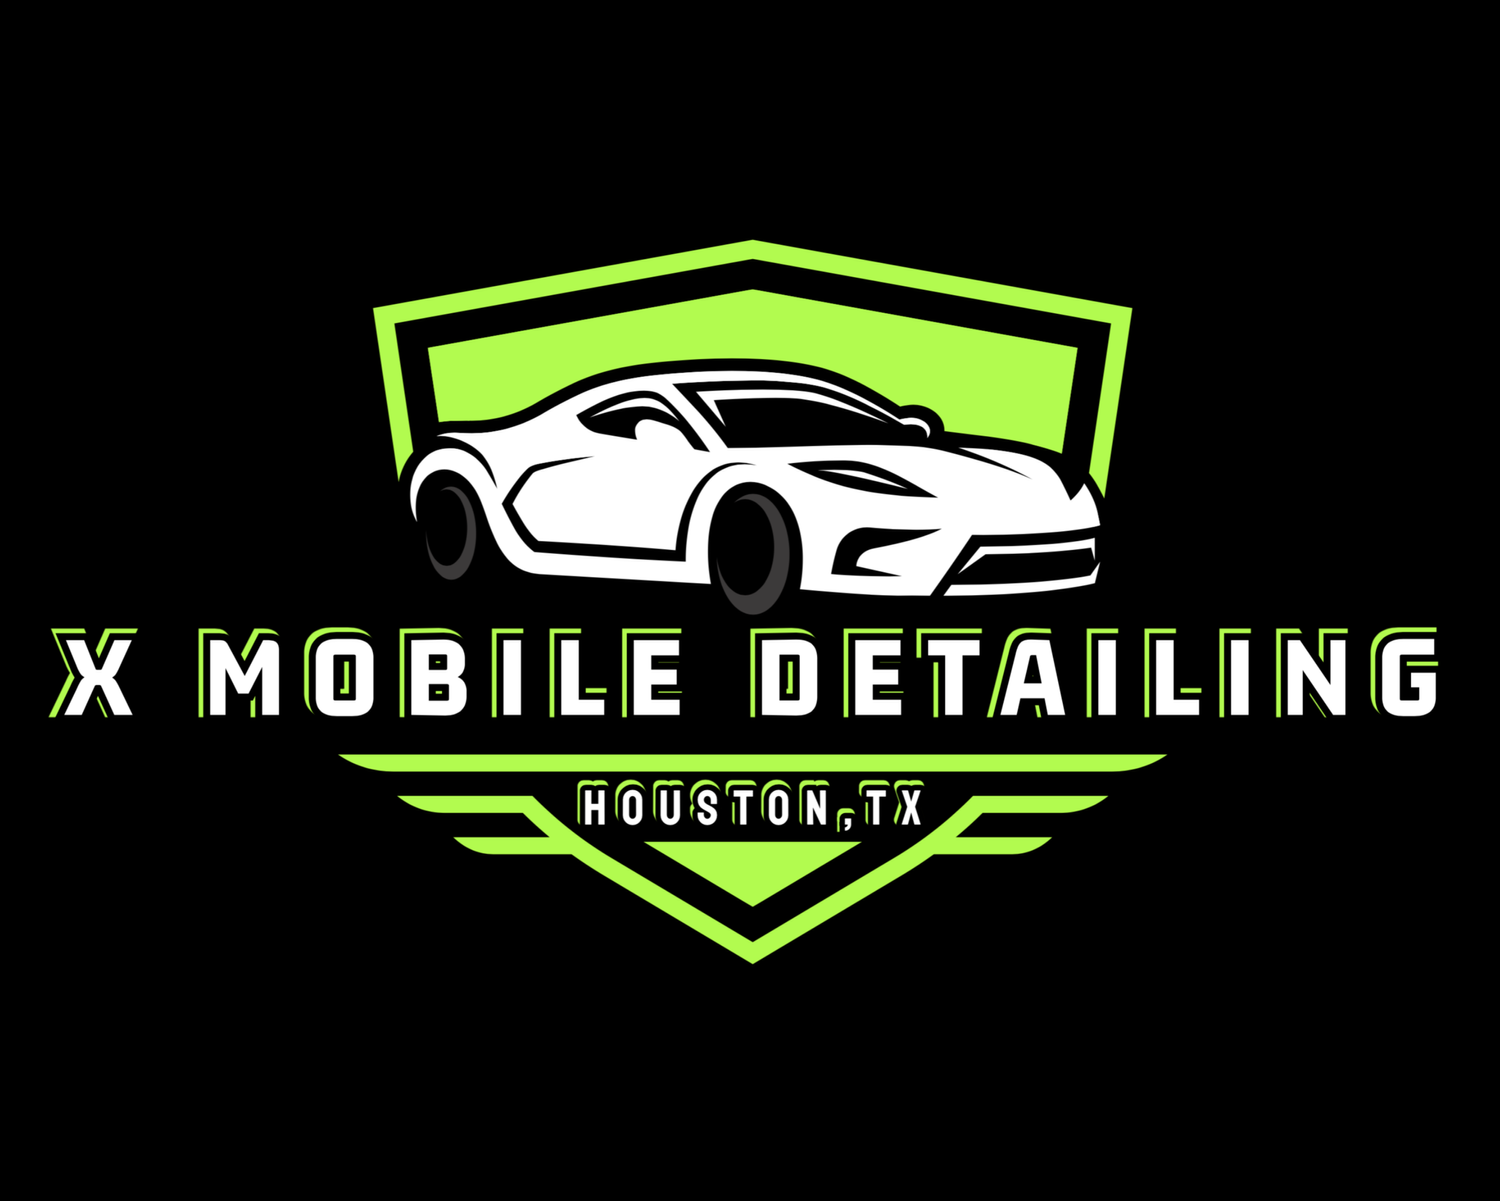 X Mobile Detailing